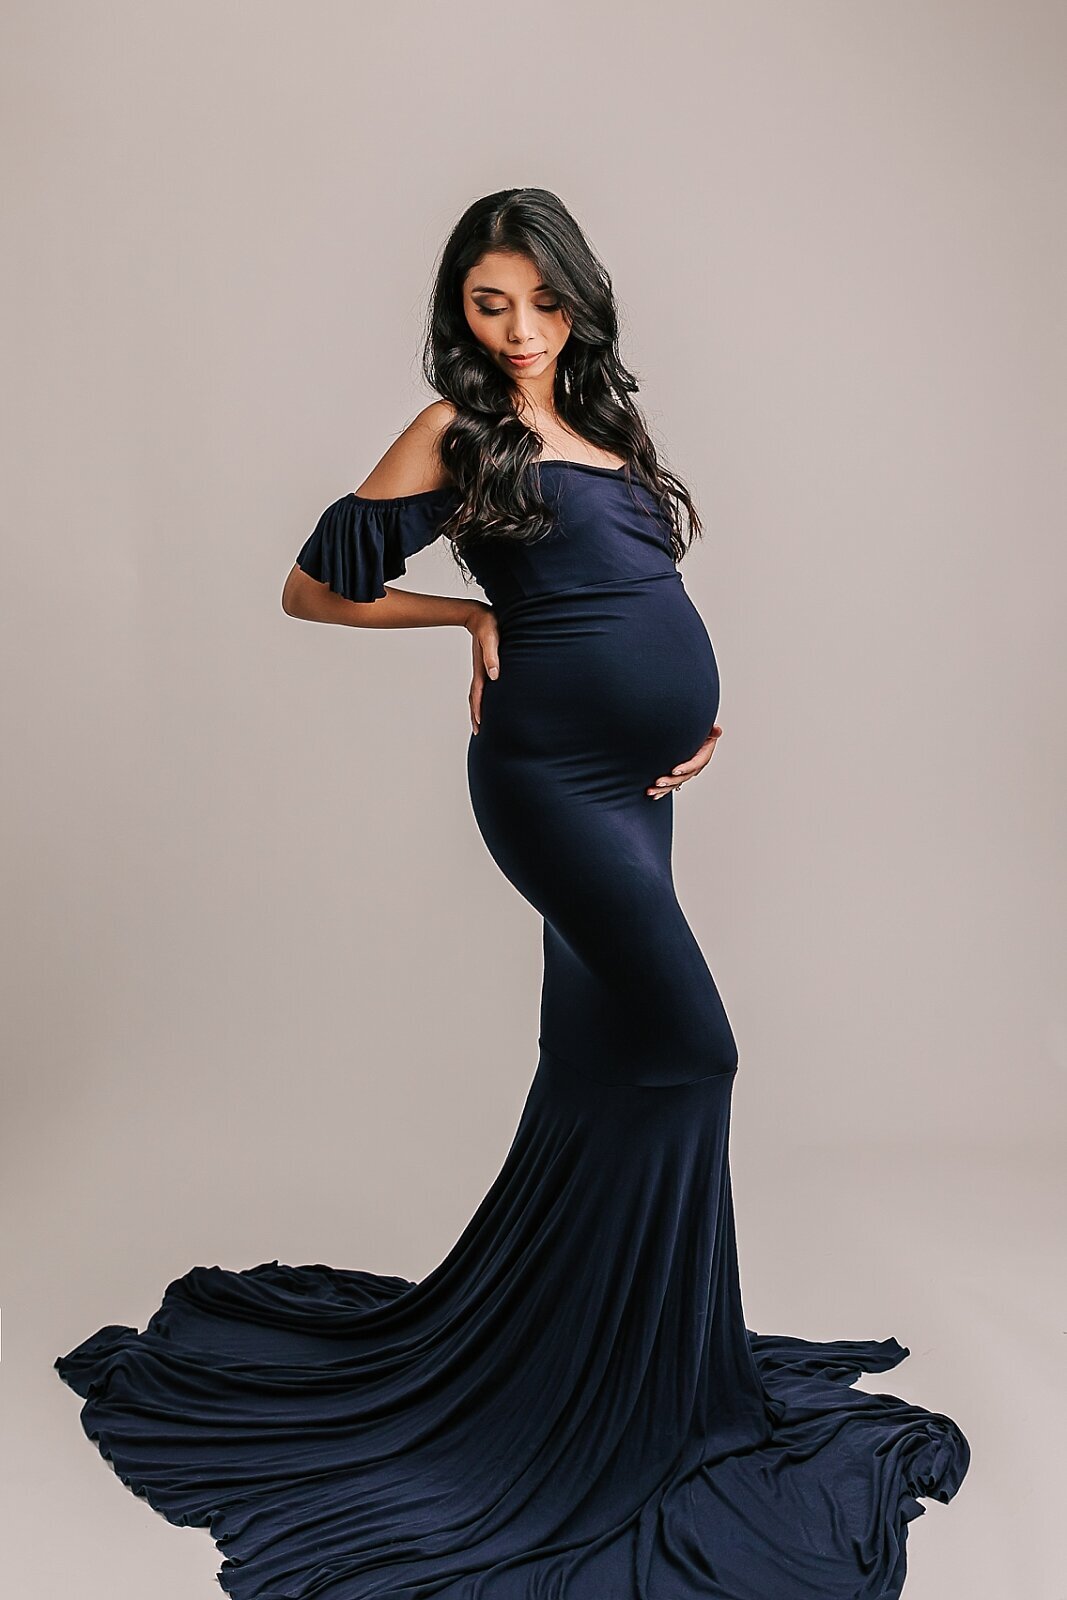 mom wearing blue dress looking down in studio maternity photography portrait